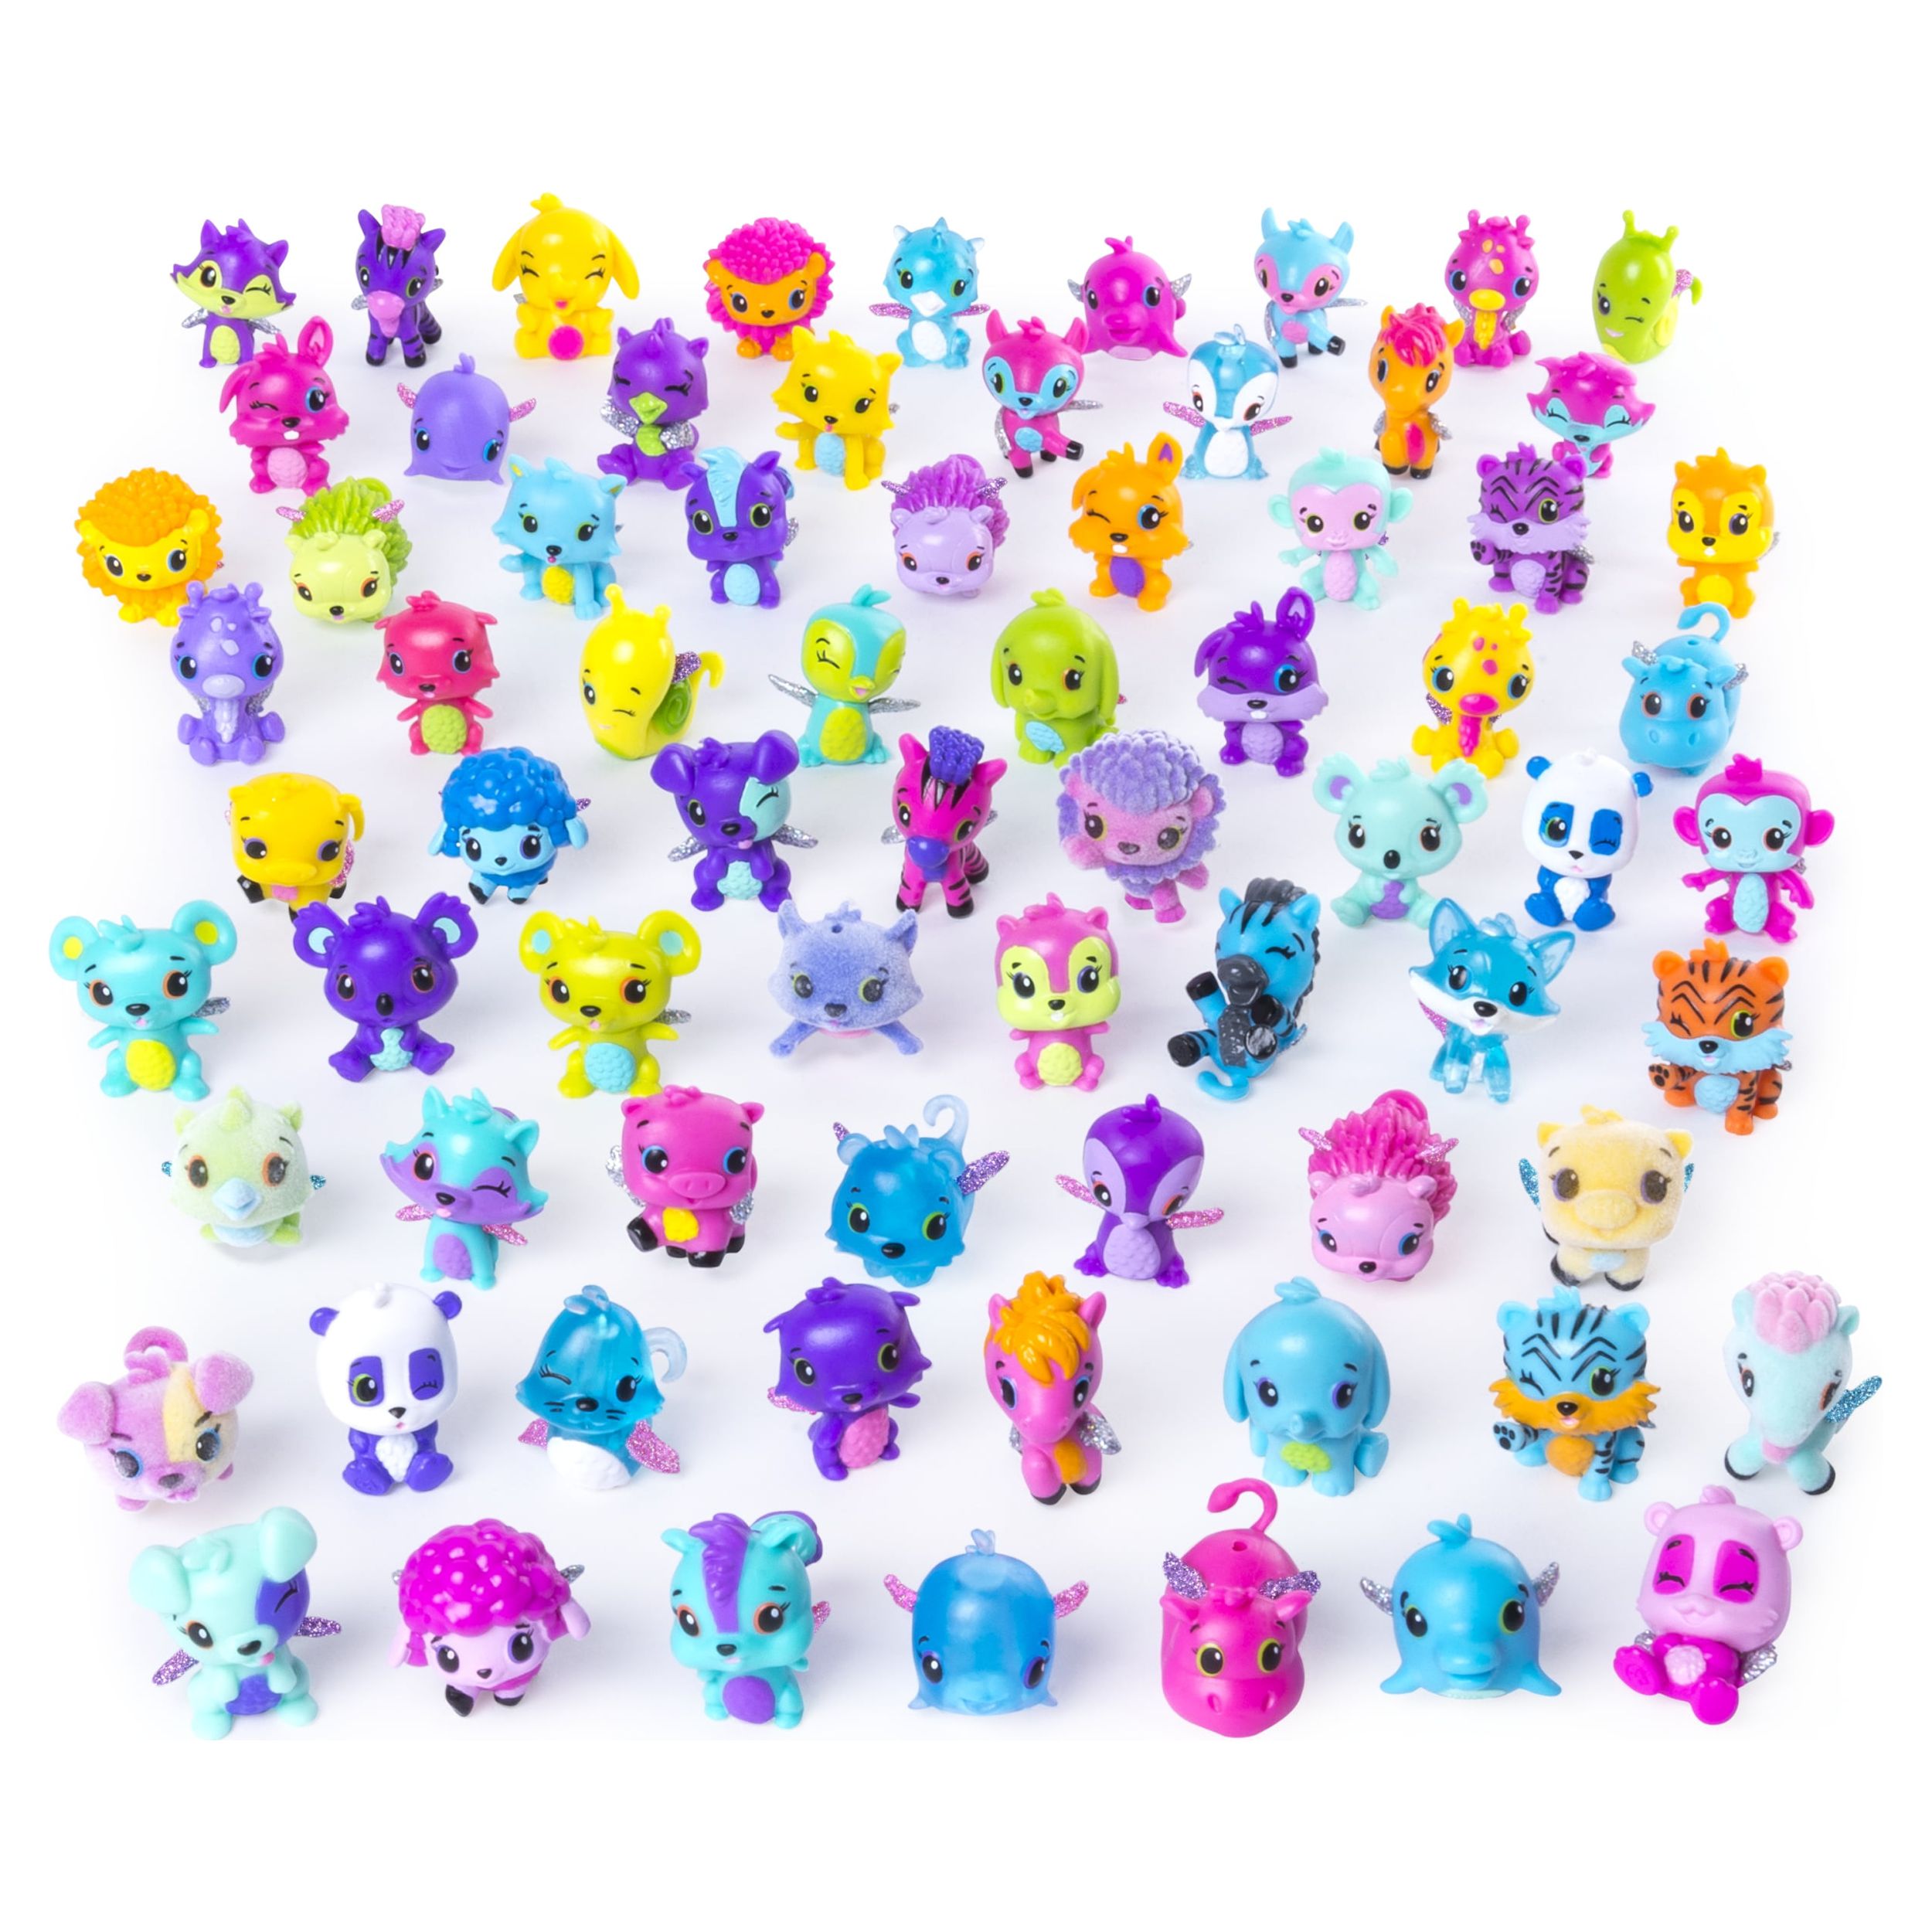 Hatchimals, CollEGGtibles, 4 Pack + Bonus (Styles & Colors May Vary) by Spin Master - Electronic Pets - image 3 of 14